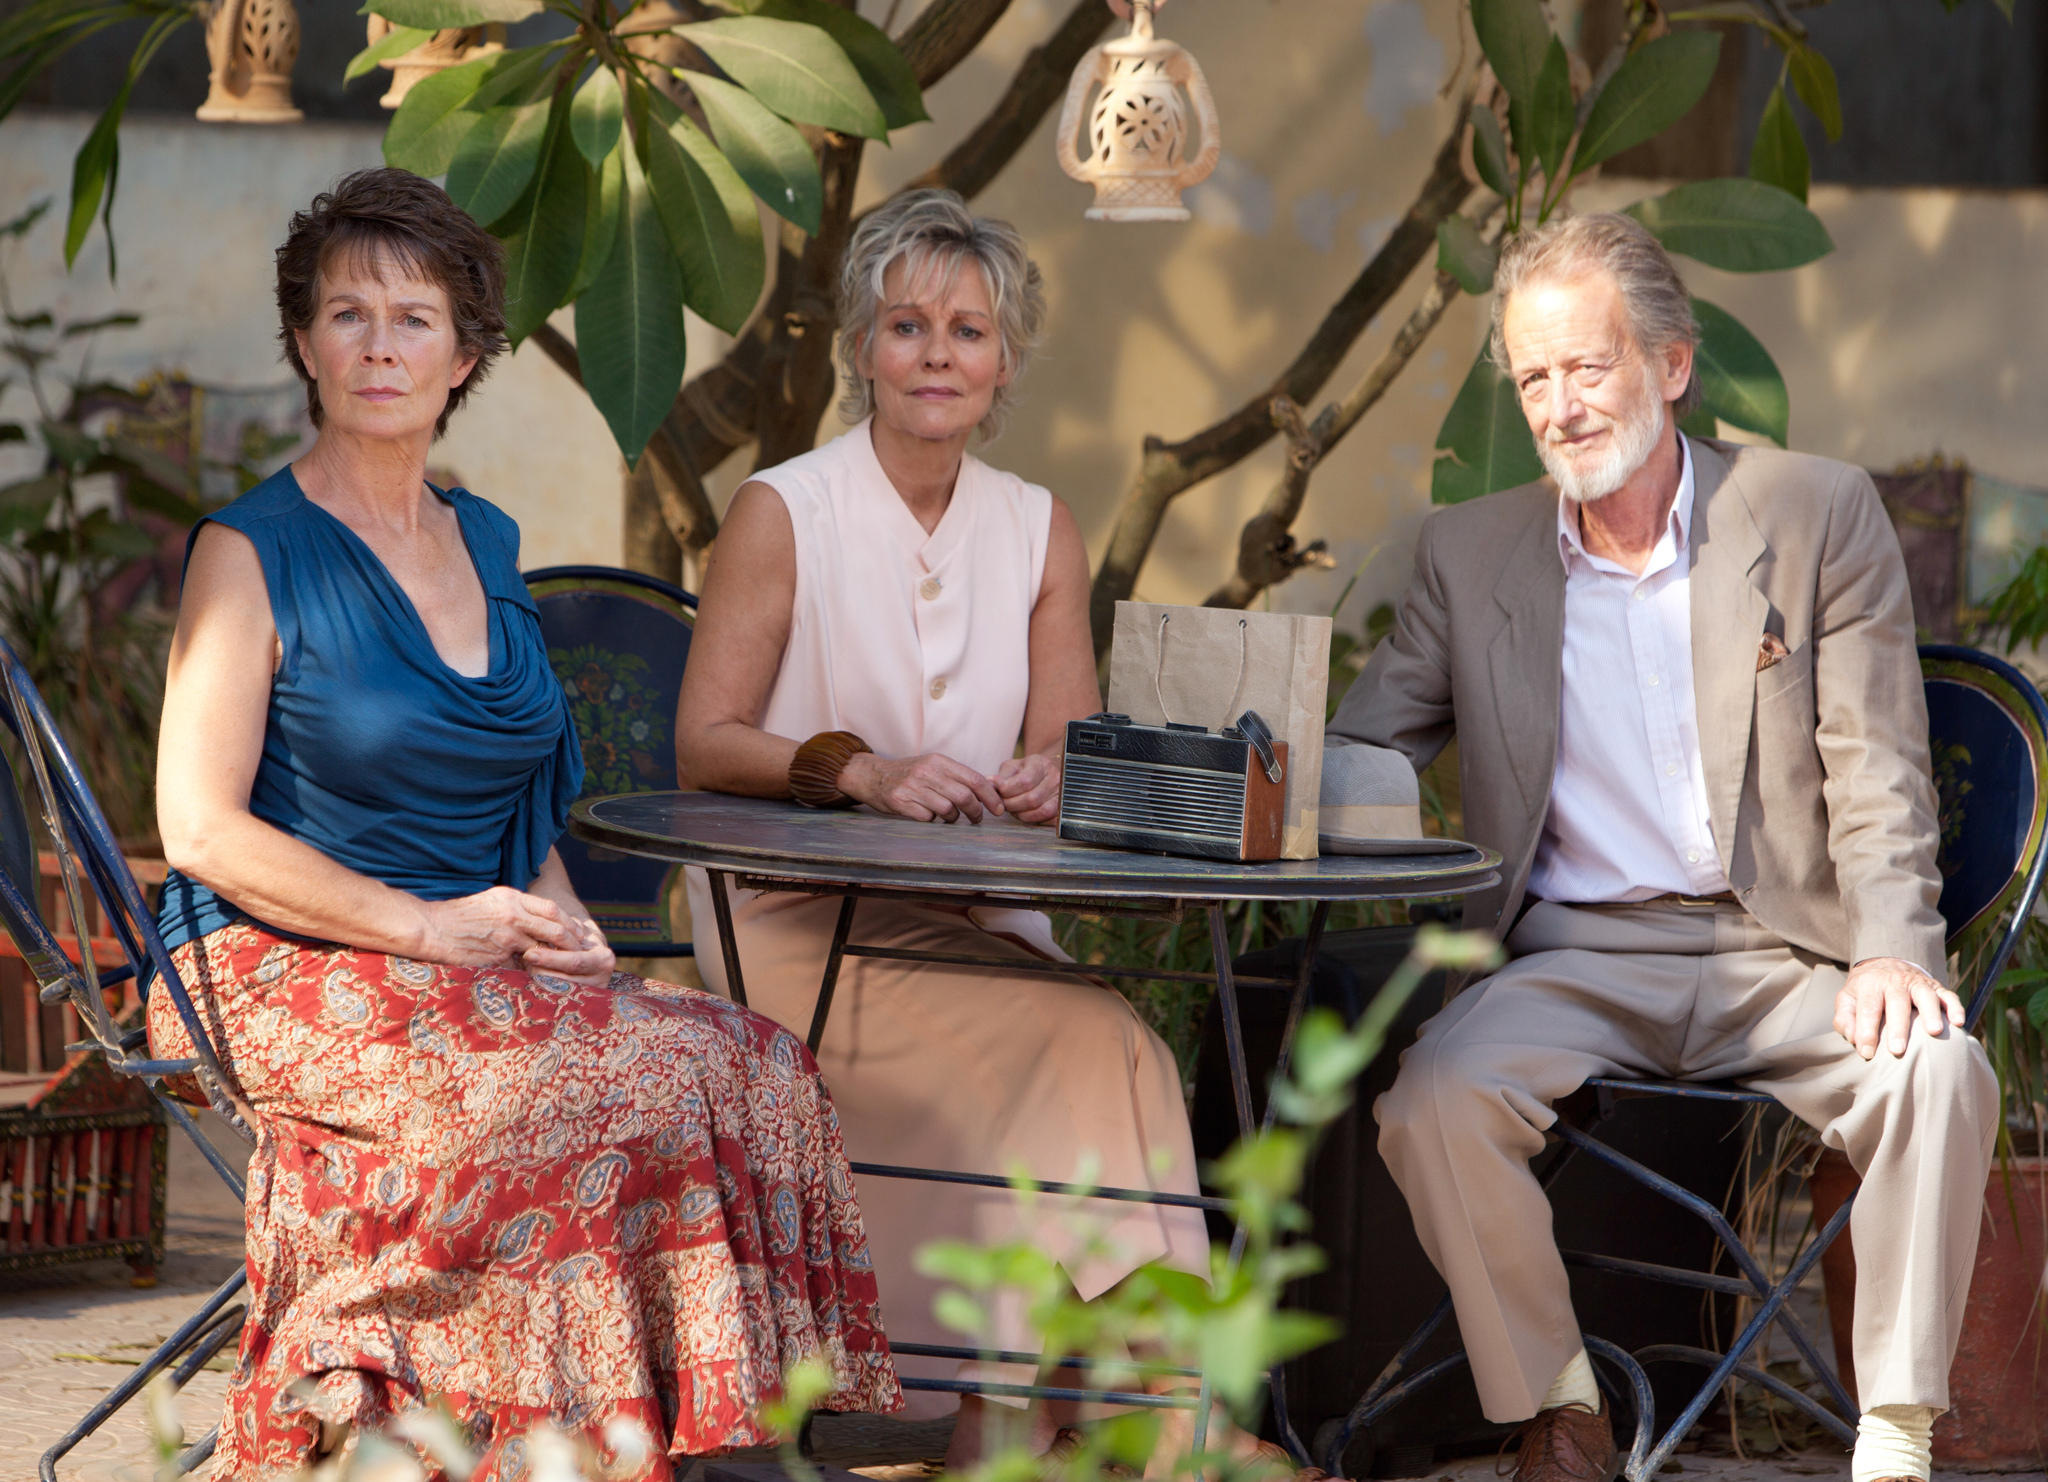 Diana Hardcastle, Celia Imrie, and Ronald Pickup in The Best Exotic Marigold Hotel (2011)